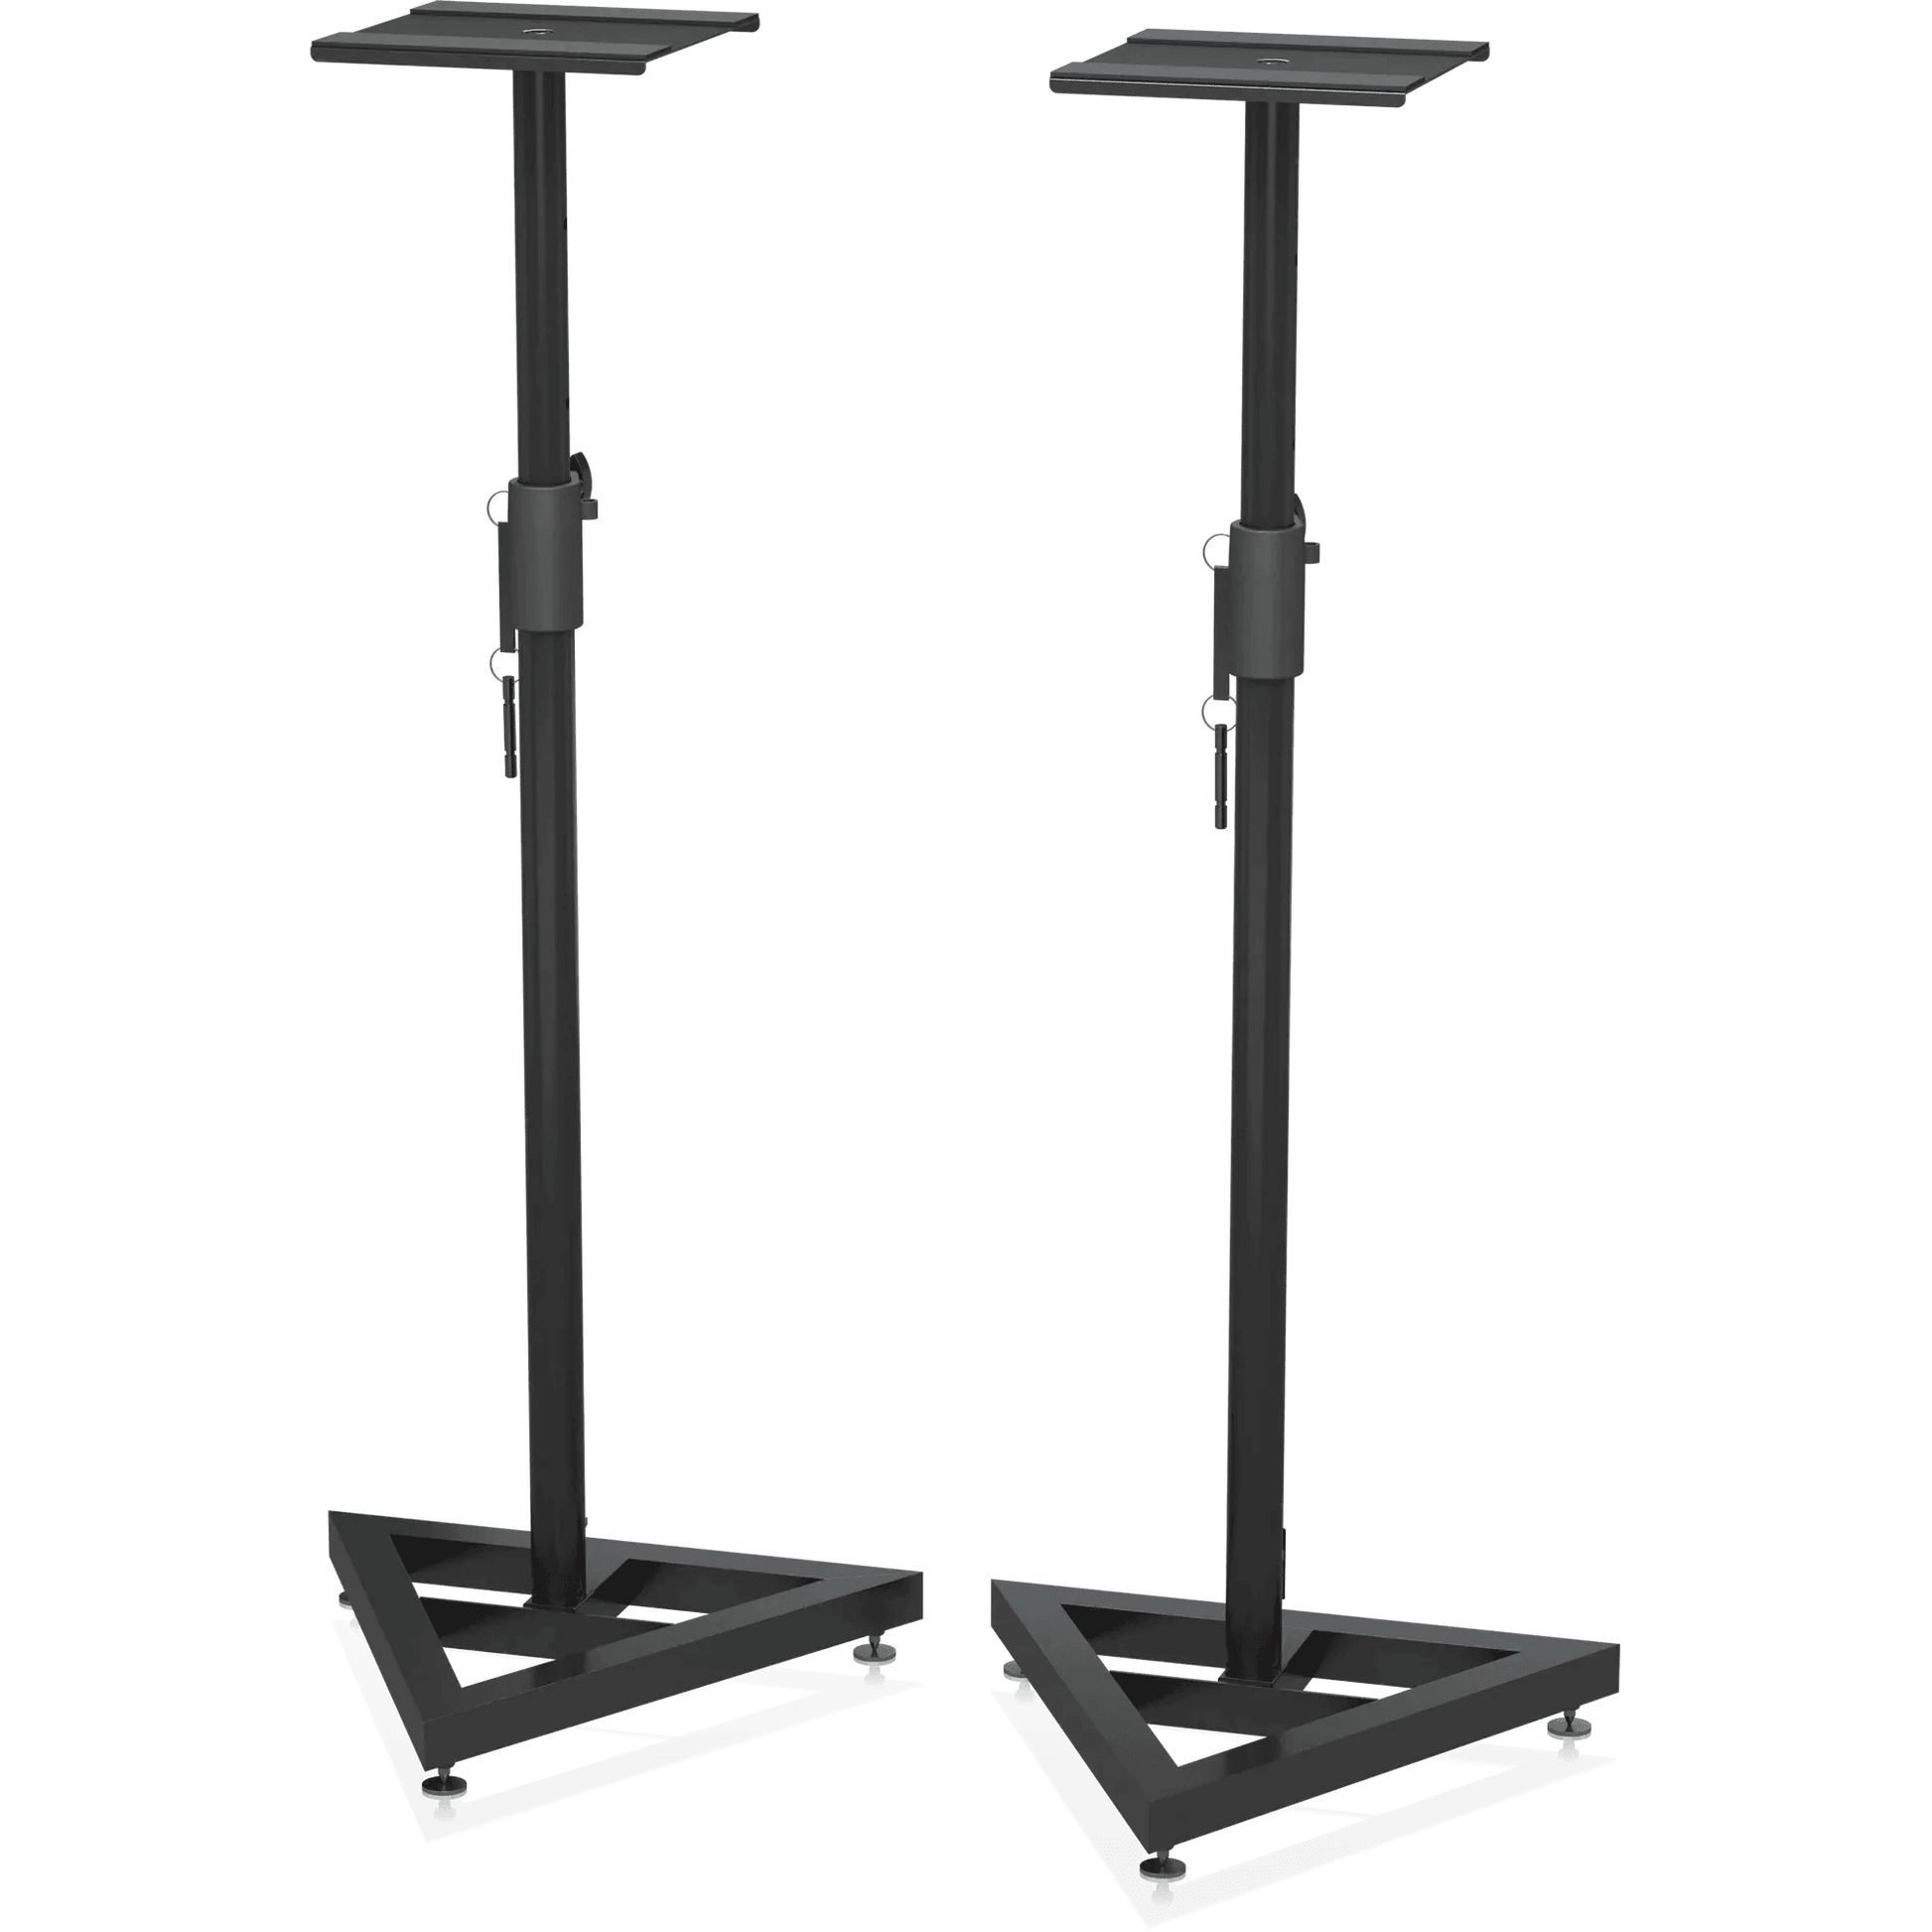 Behringer SM5002 Heavy-Duty Height-Adjustable Monitor Stand Set